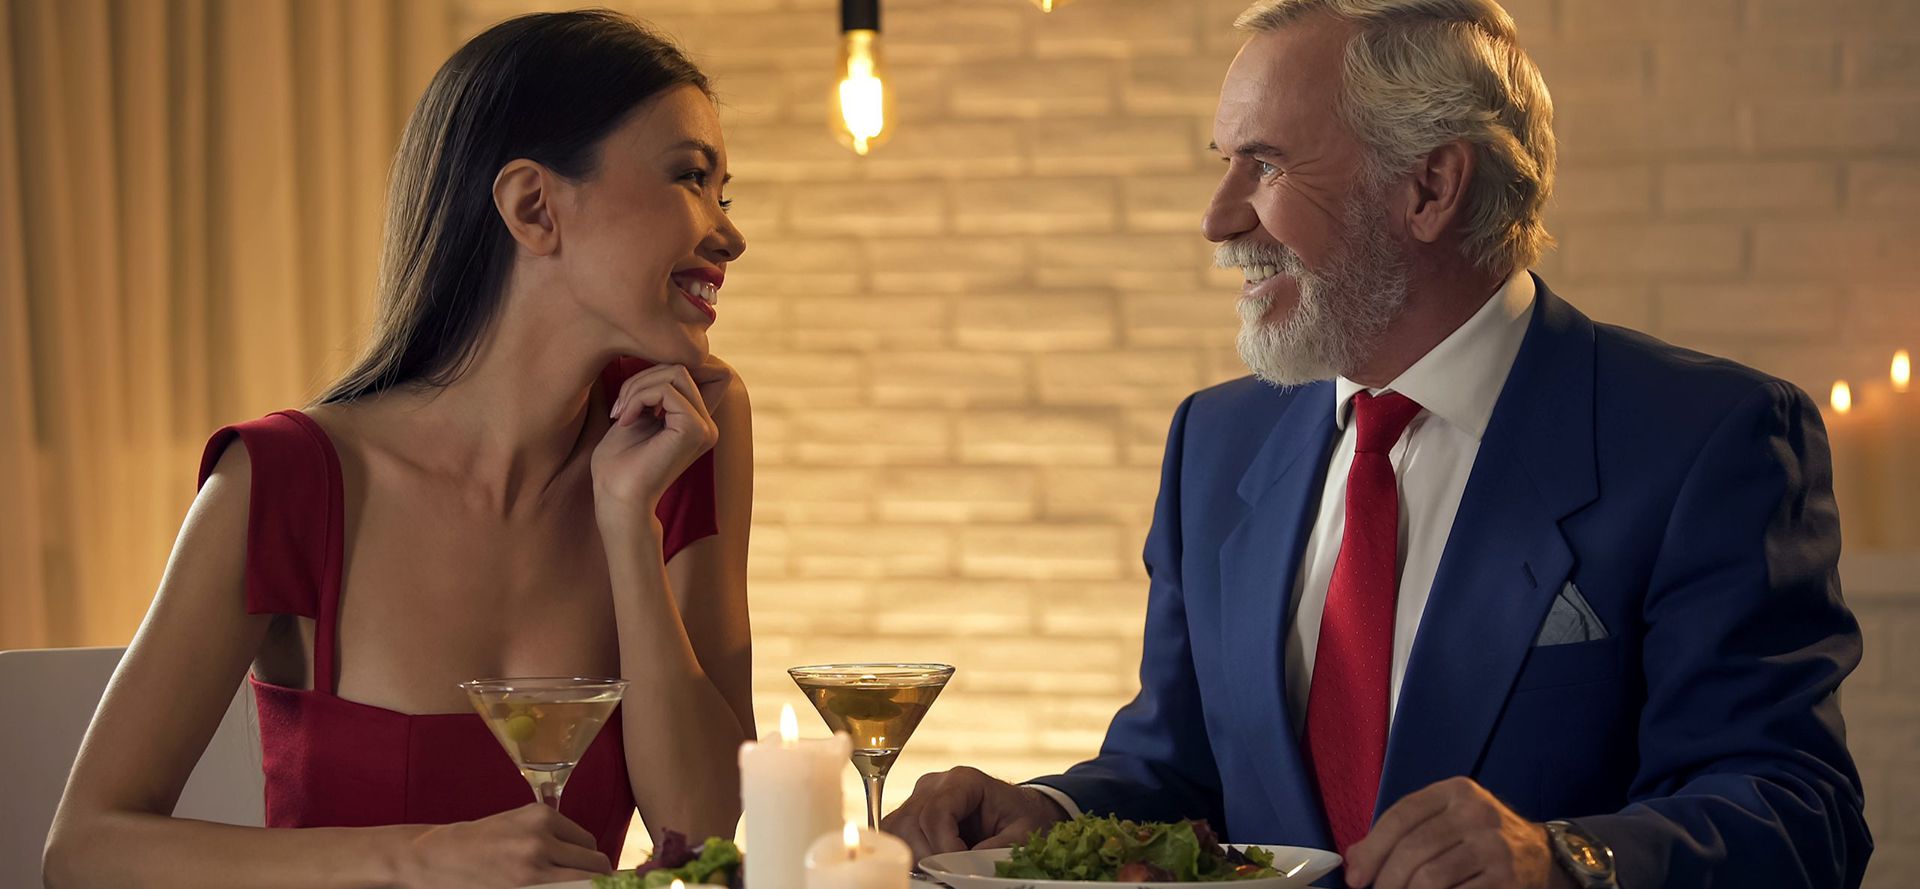 Young woman have a dinner with an older man.